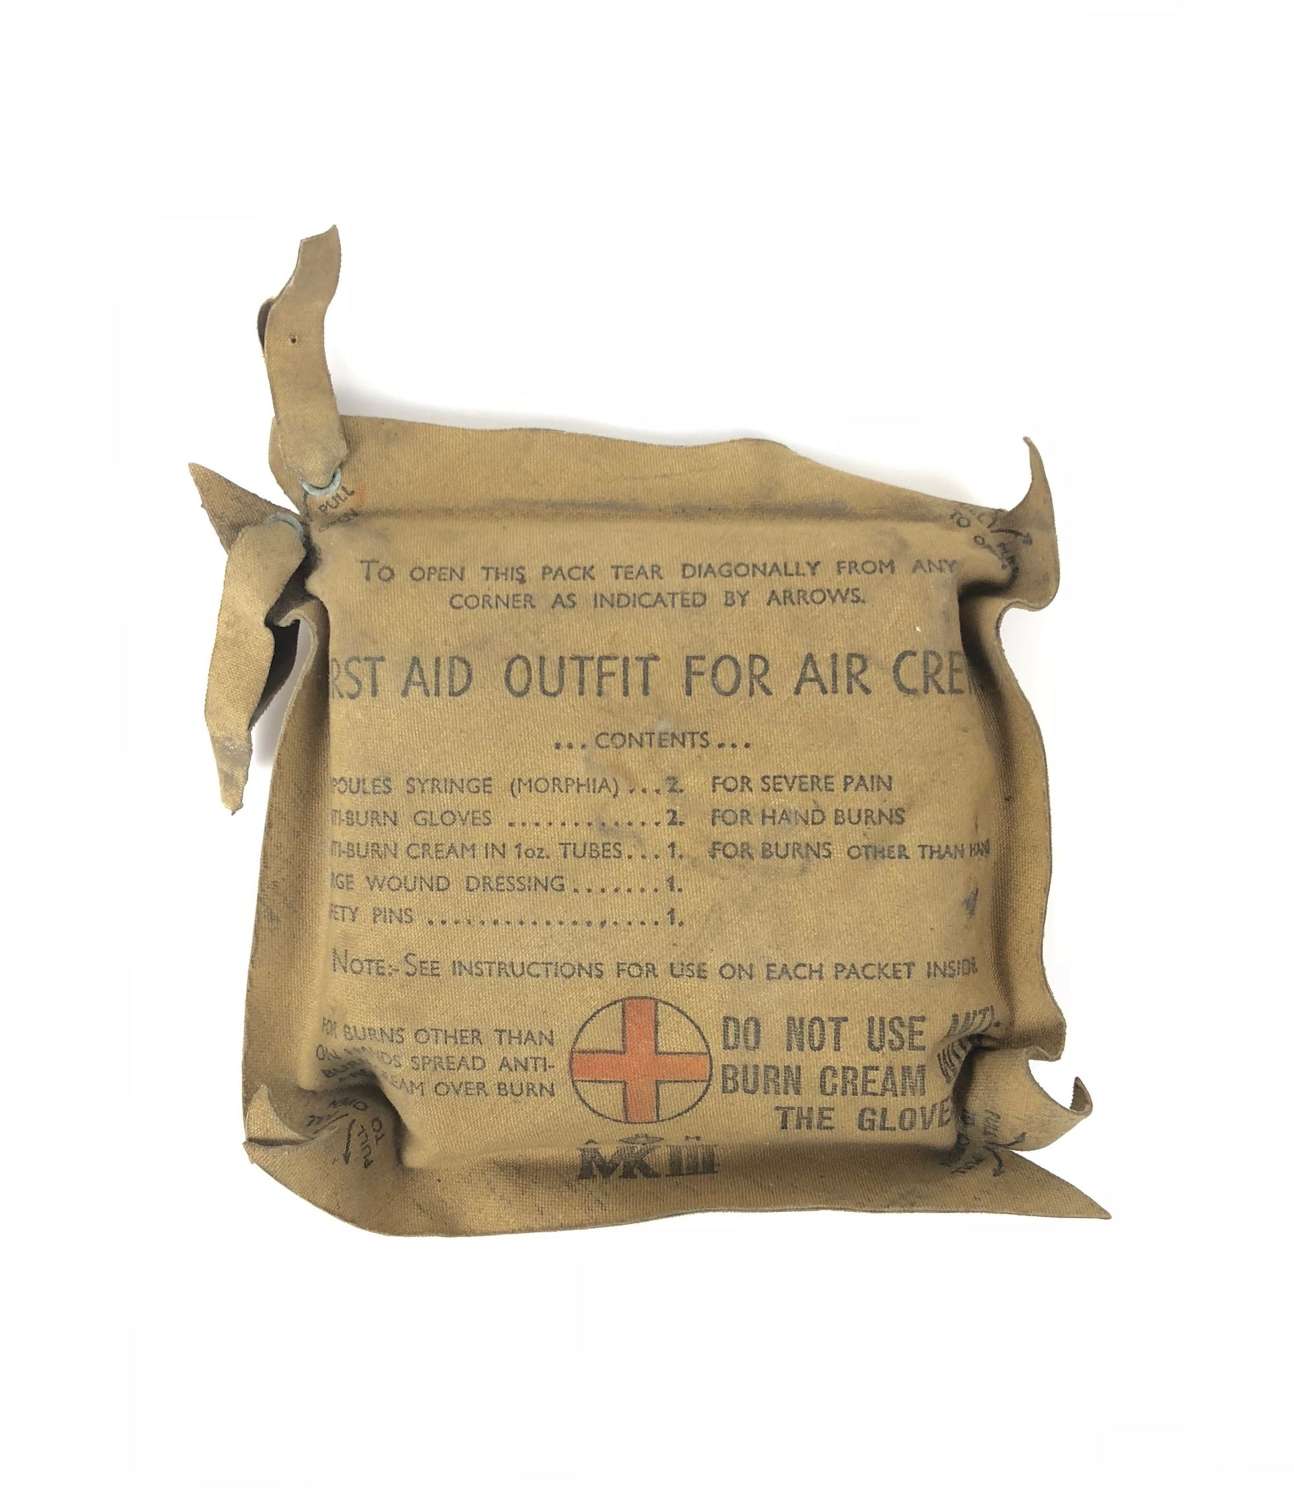 WW2 RAF Personal Aircrew First Aid Pack MKIII.